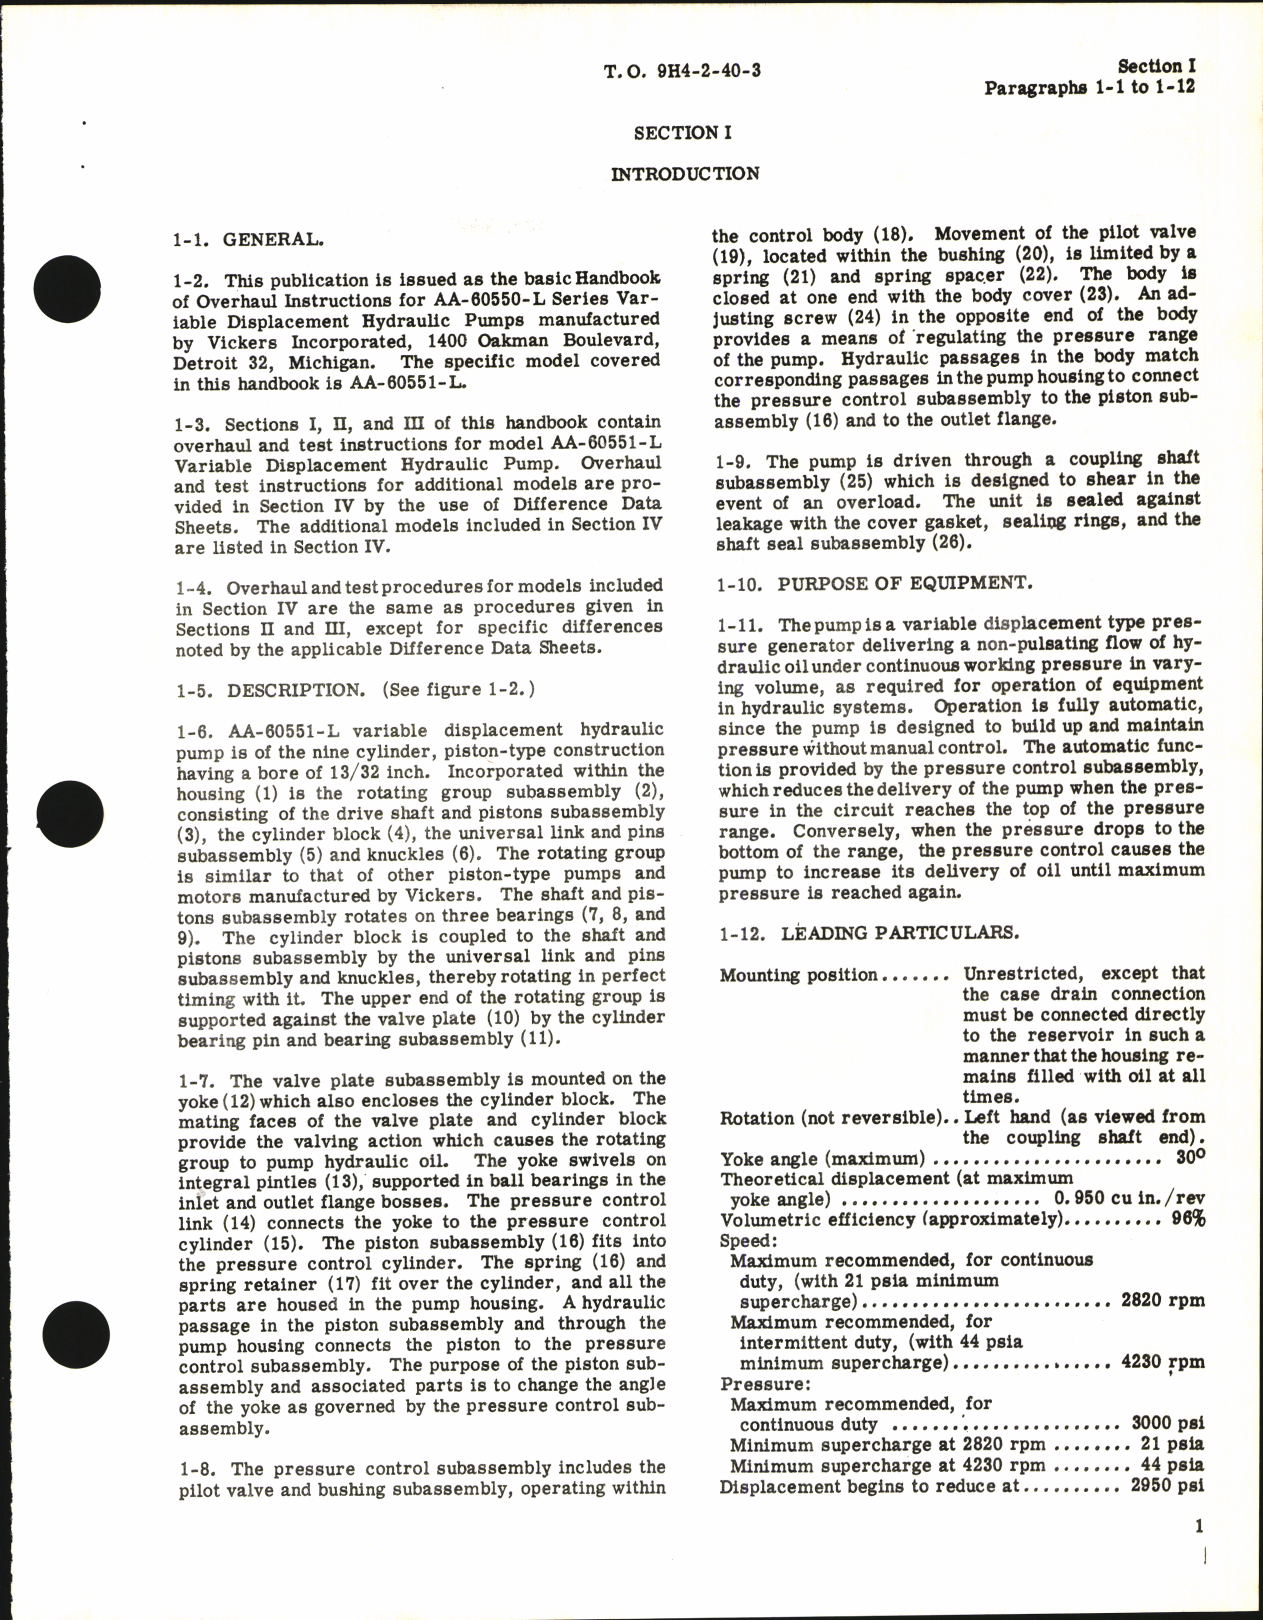 Sample page 5 from AirCorps Library document: Overhaul Instructions for Variable Displacement Hydraulic Pumps AA-60550-L Series